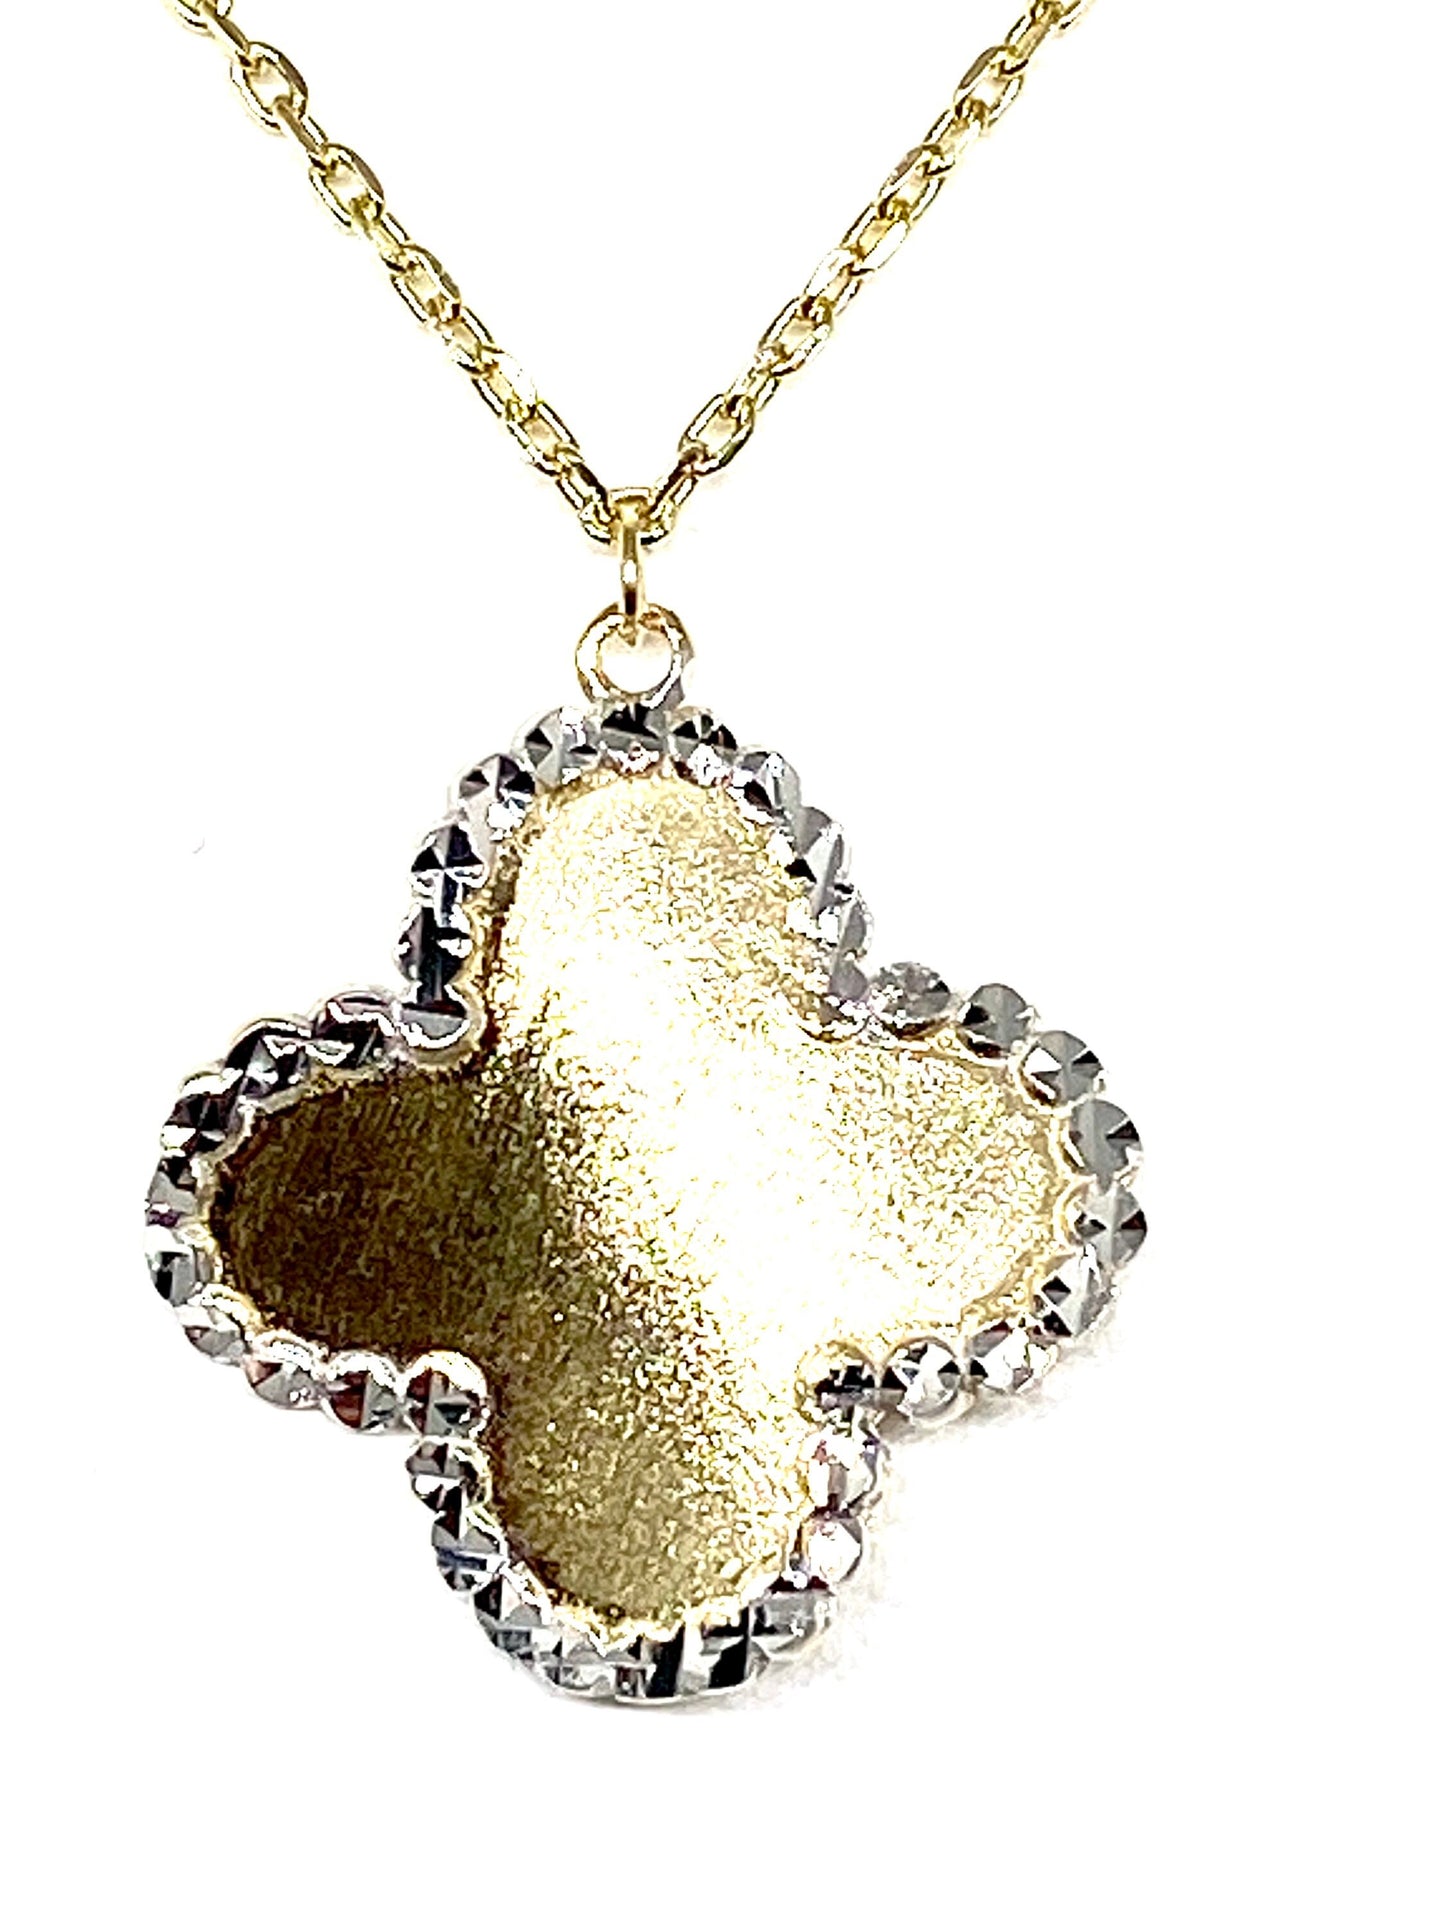 Yellow & White Gold Satin Finish Clover Pendant Chain Necklace